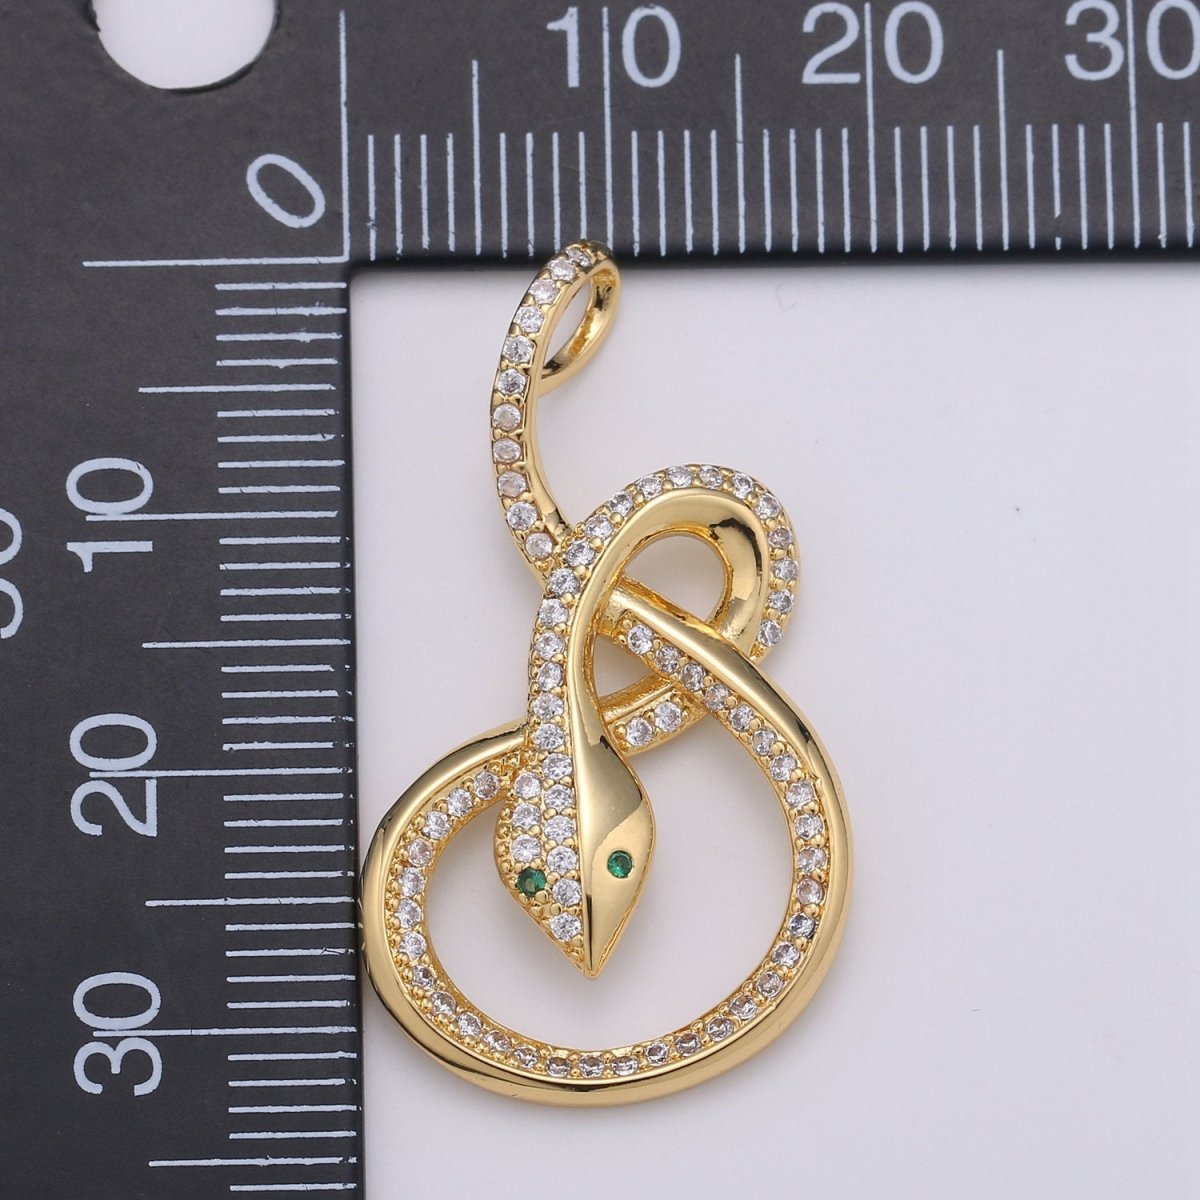 Micro Pave Snake charm, Gold Filled Snake Charm, Animal Charm Gold Serpent Charm Necklace Pendant Finding for Jewelry Making Supply I-916 - DLUXCA